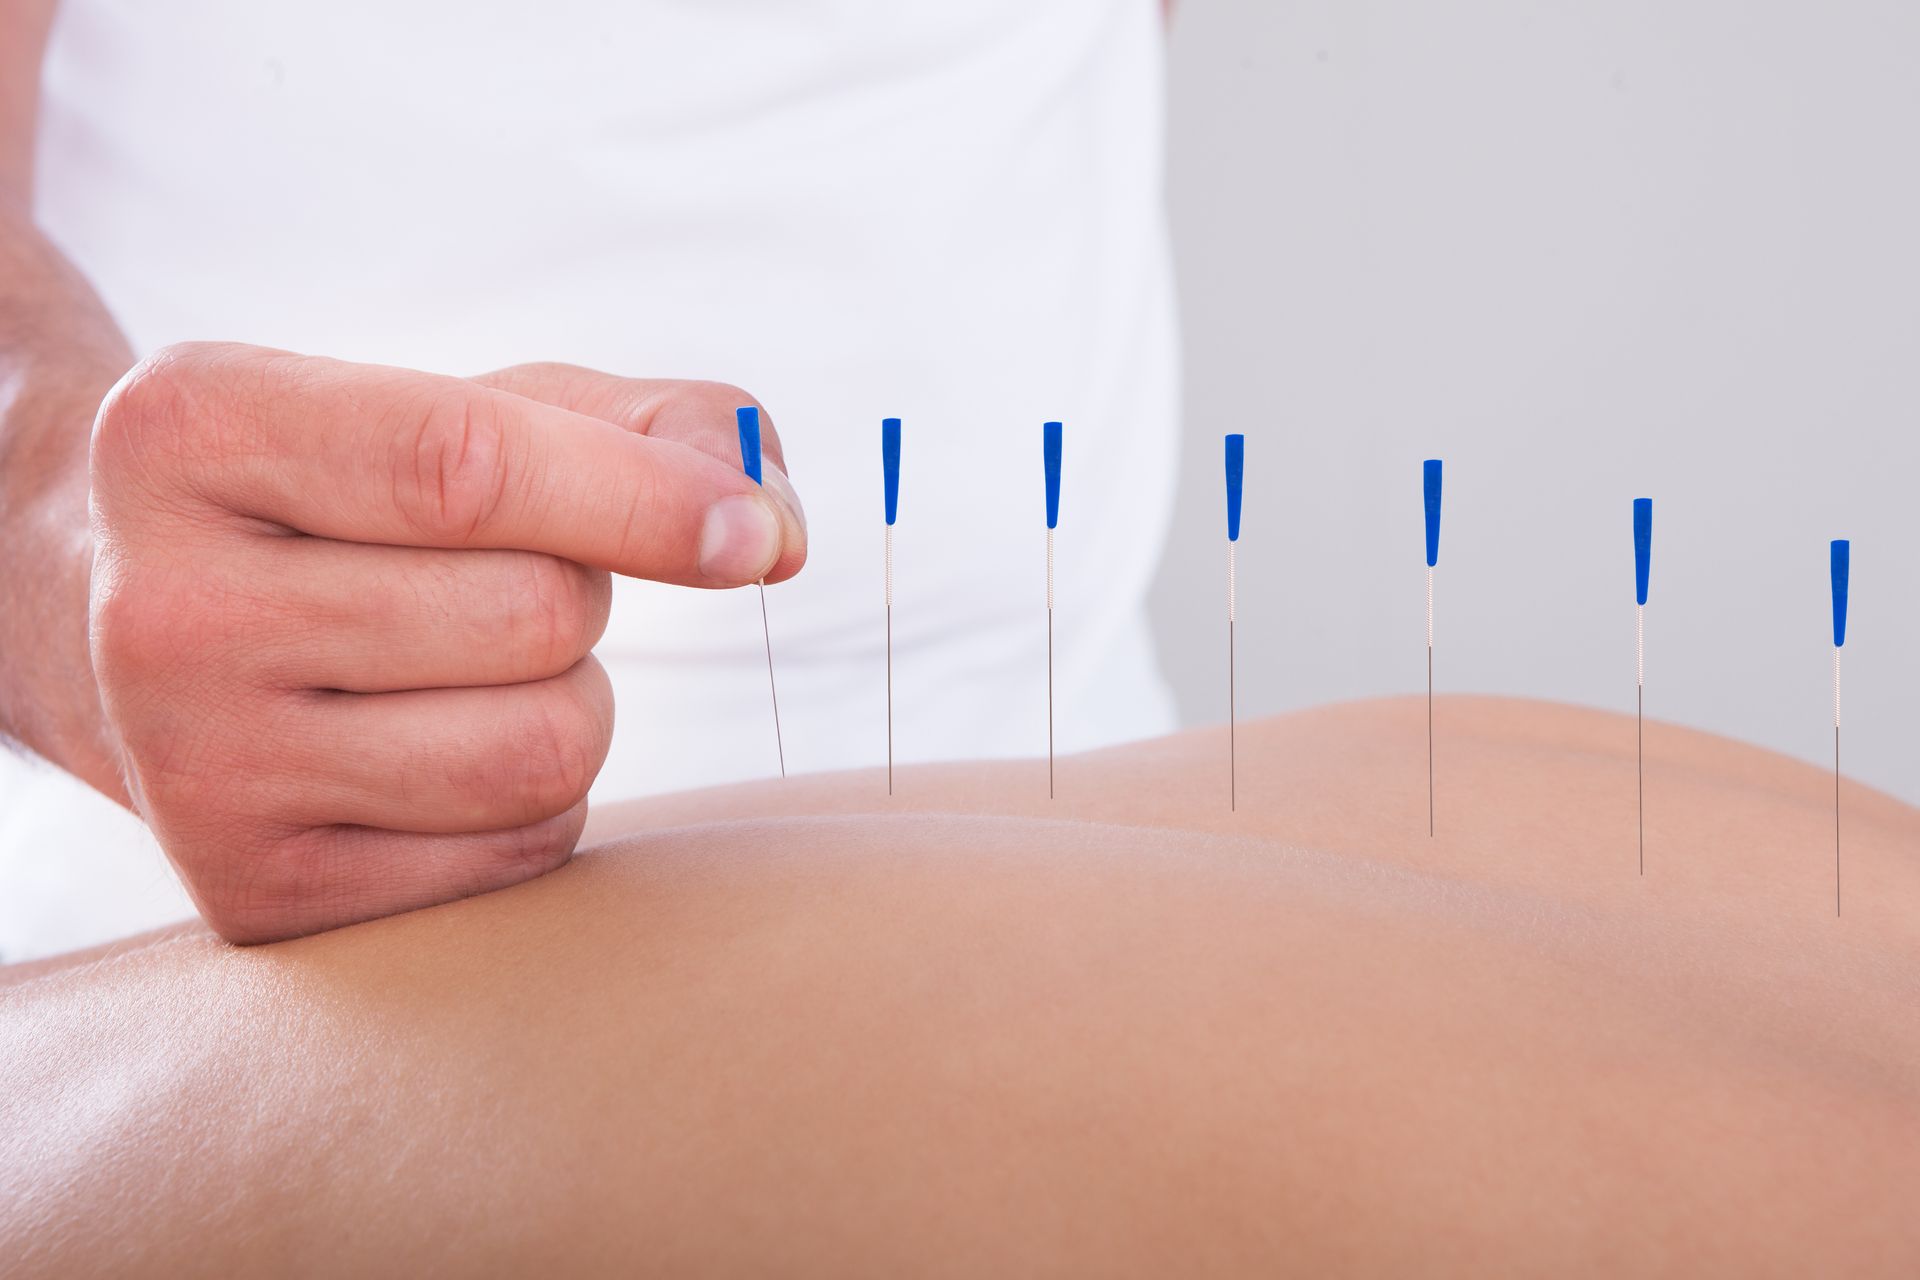 a person is getting acupuncture on their back .